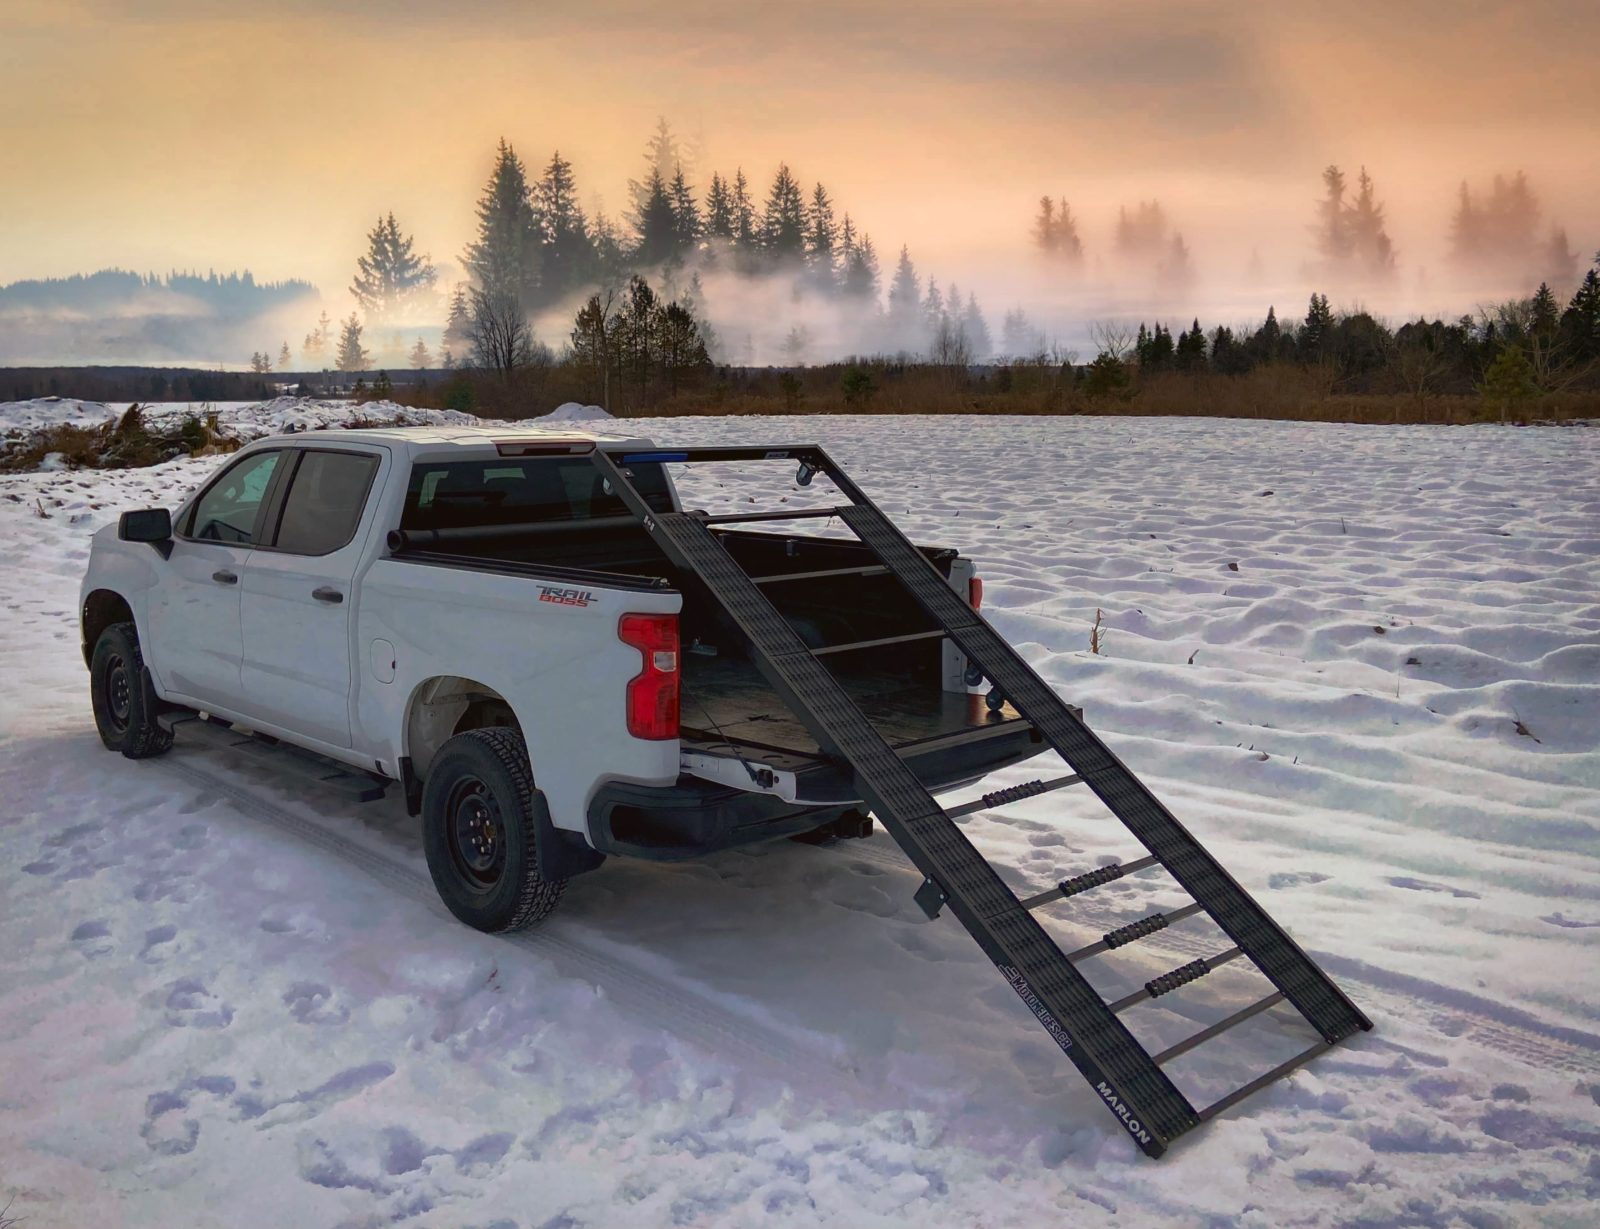 single loader ramp ready to transport a snowmobile